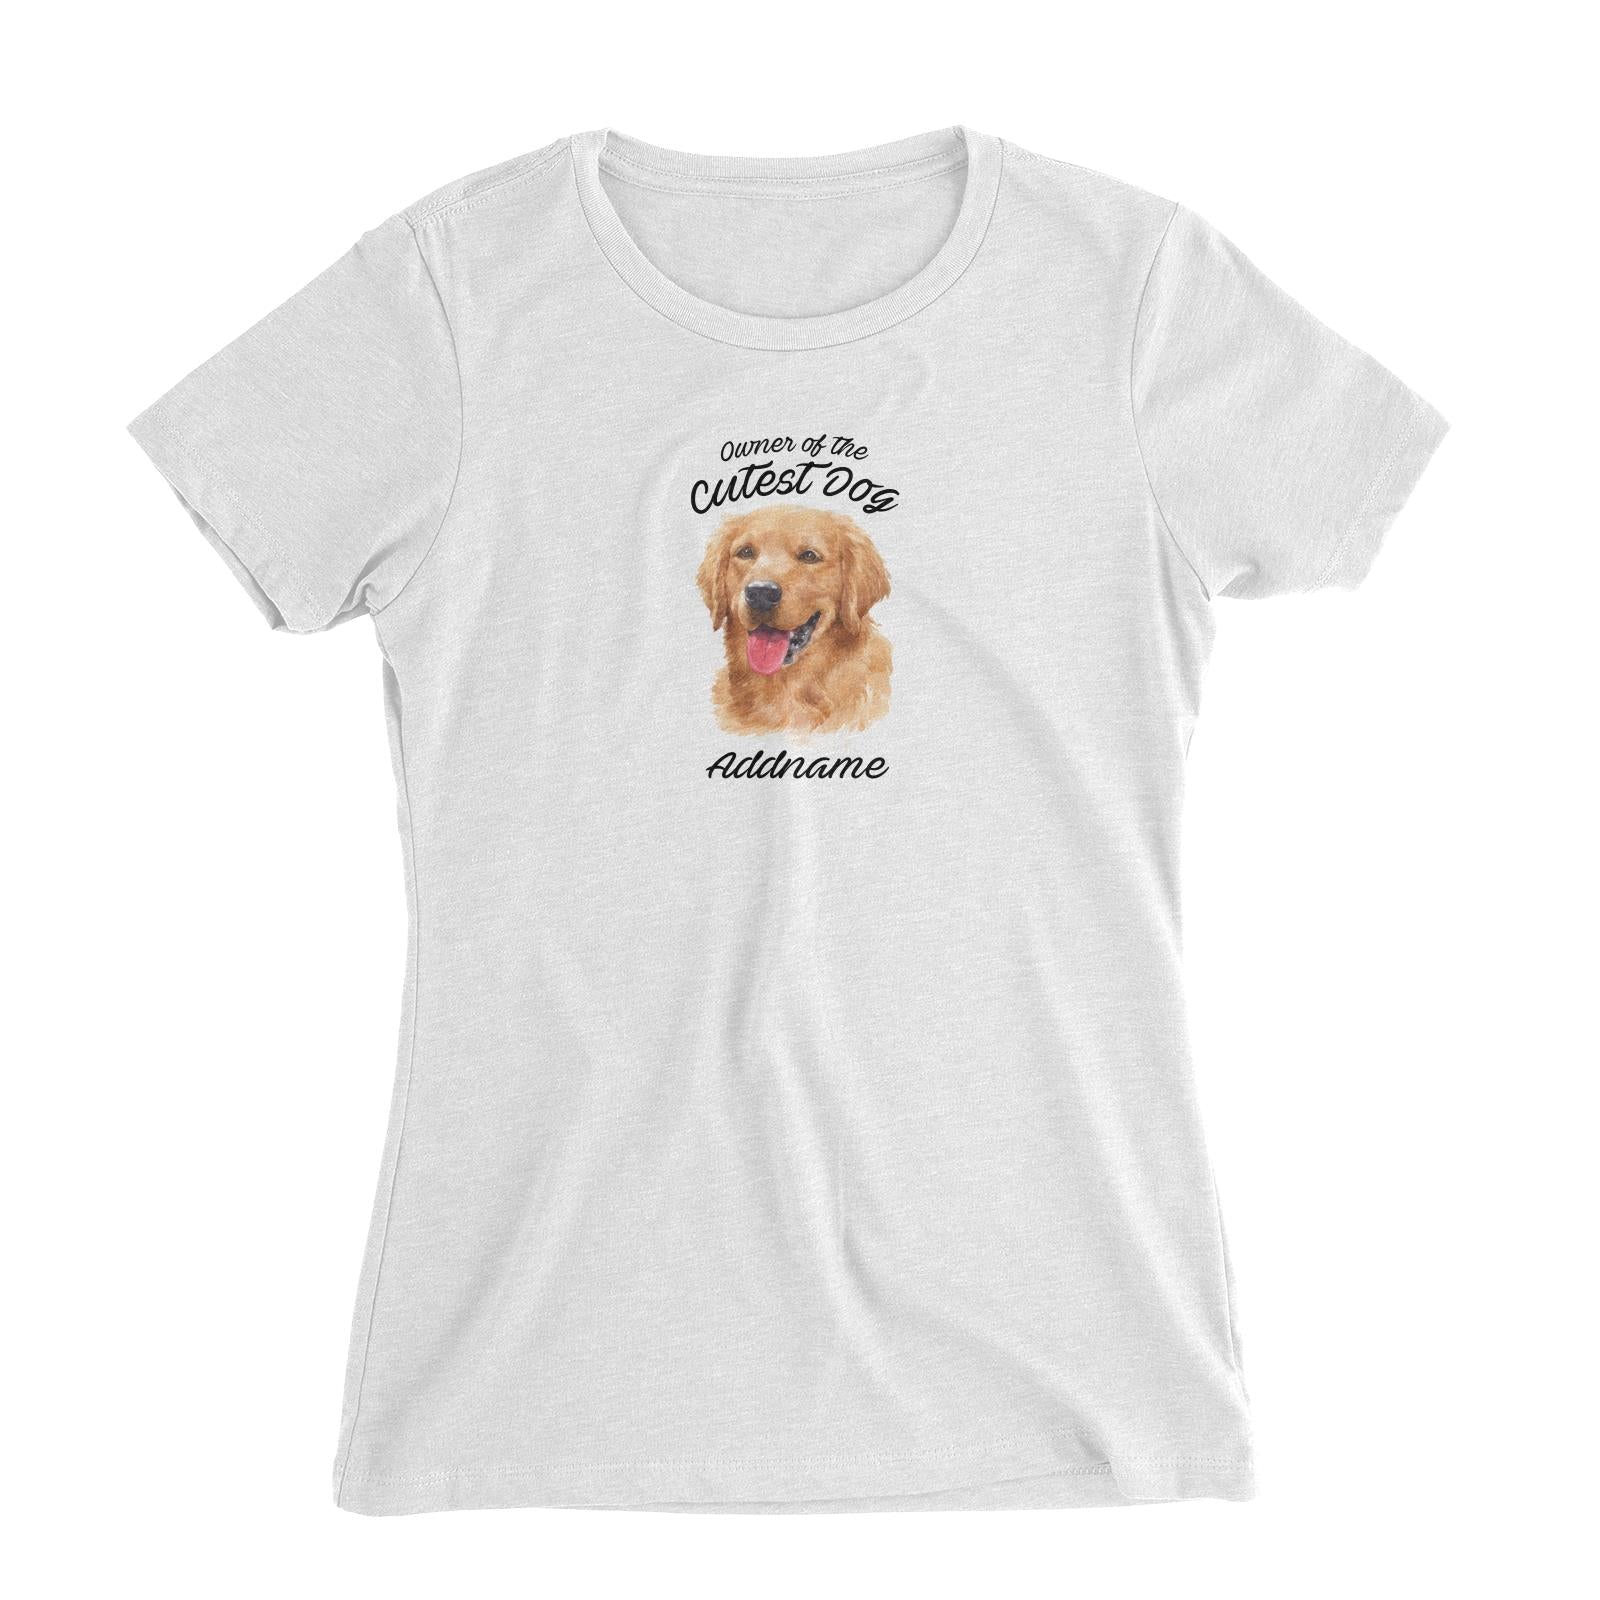 Watercolor Dog Owner Of The Cutest Dog Golden Retriever Addname Women's Slim Fit T-Shirt